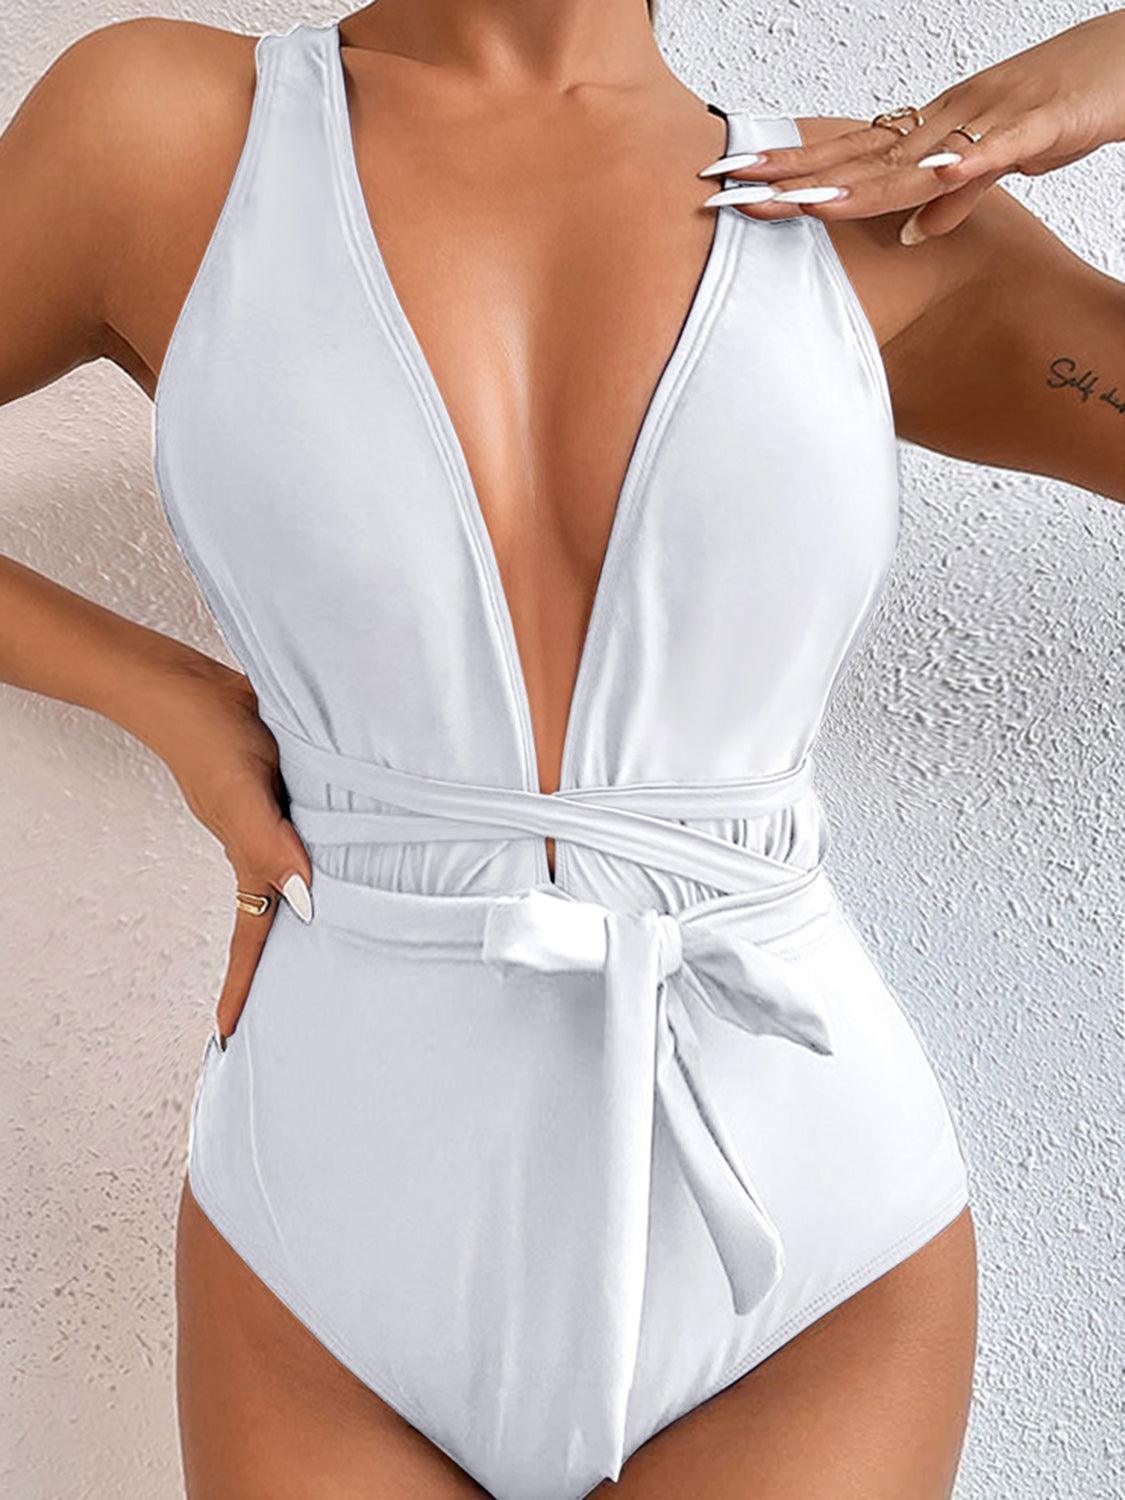 a woman in a white one piece swimsuit